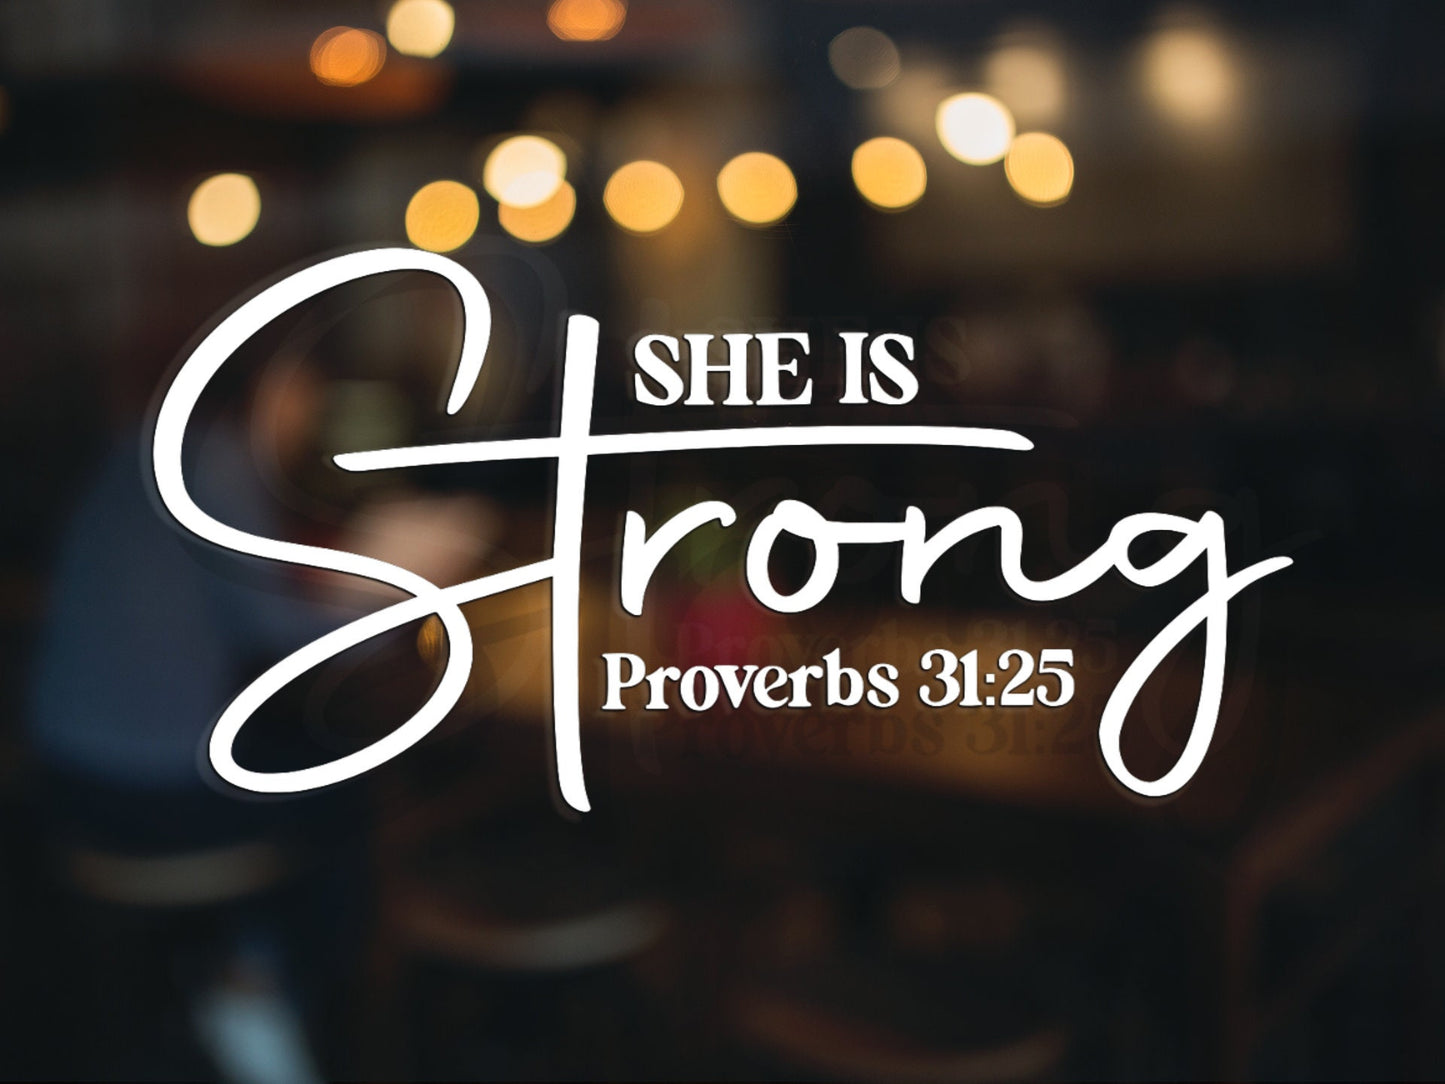 She is Strong Proverbs 31:25 Decal - Many Colors & Sizes